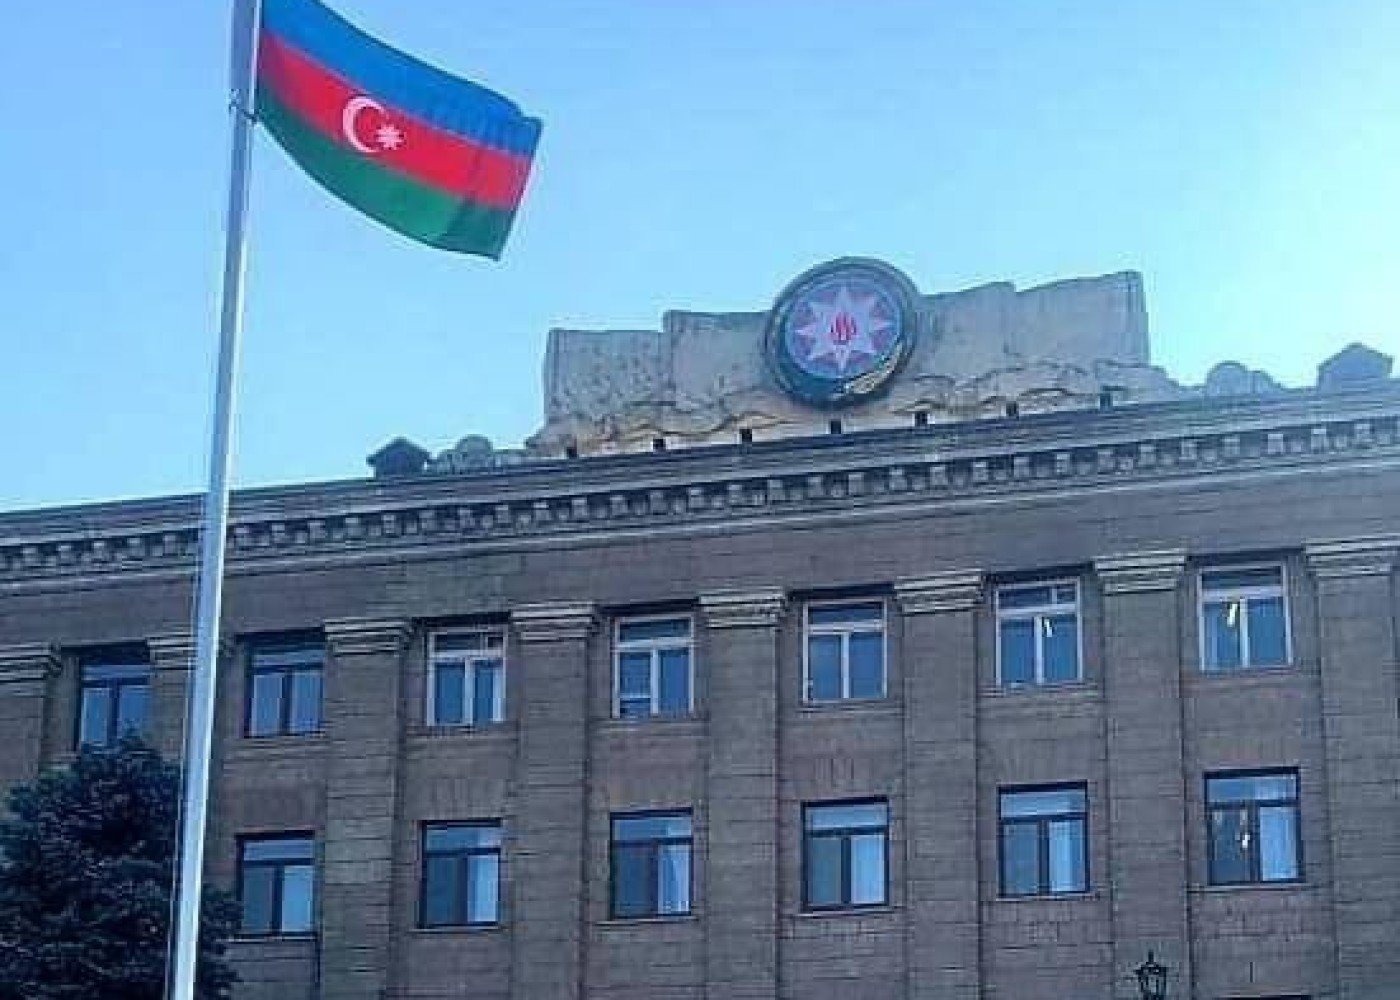 Azerbaijan sets up database of cultural hubs in its Khankendi, Khojaly and other regions